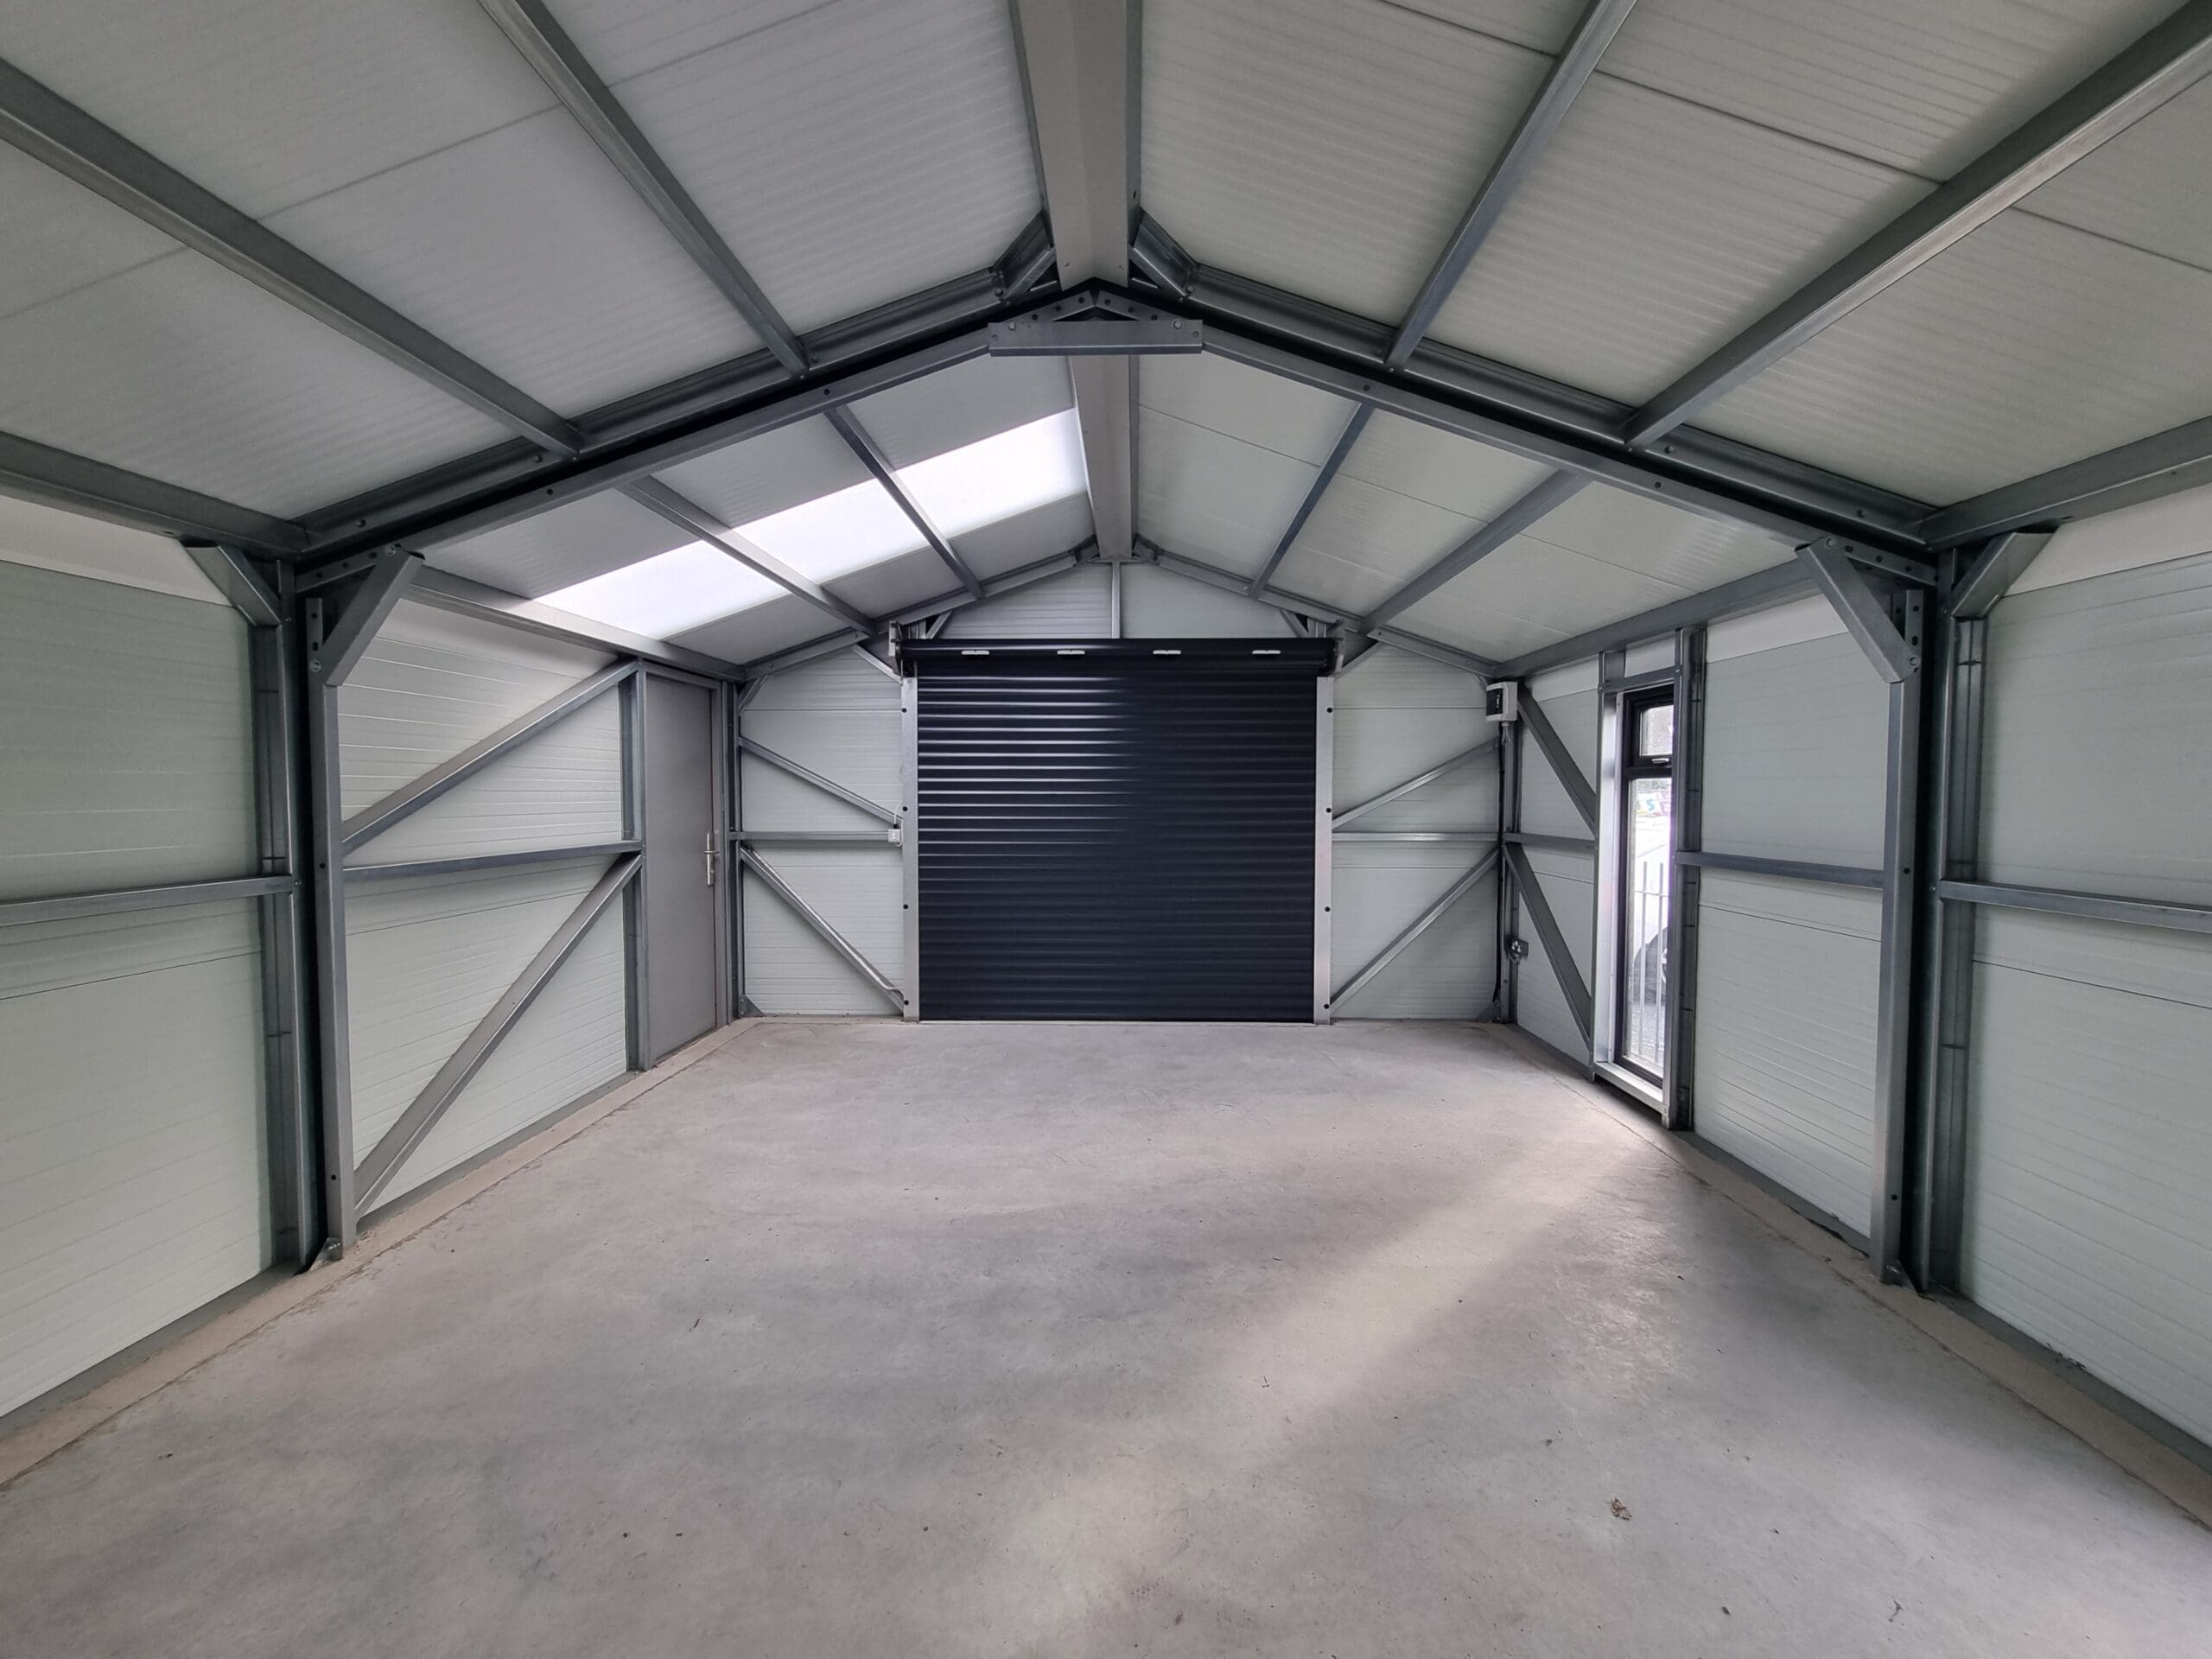 Interior of our Gold Range Garage showing an added electric roller door which is an optional upgrade.